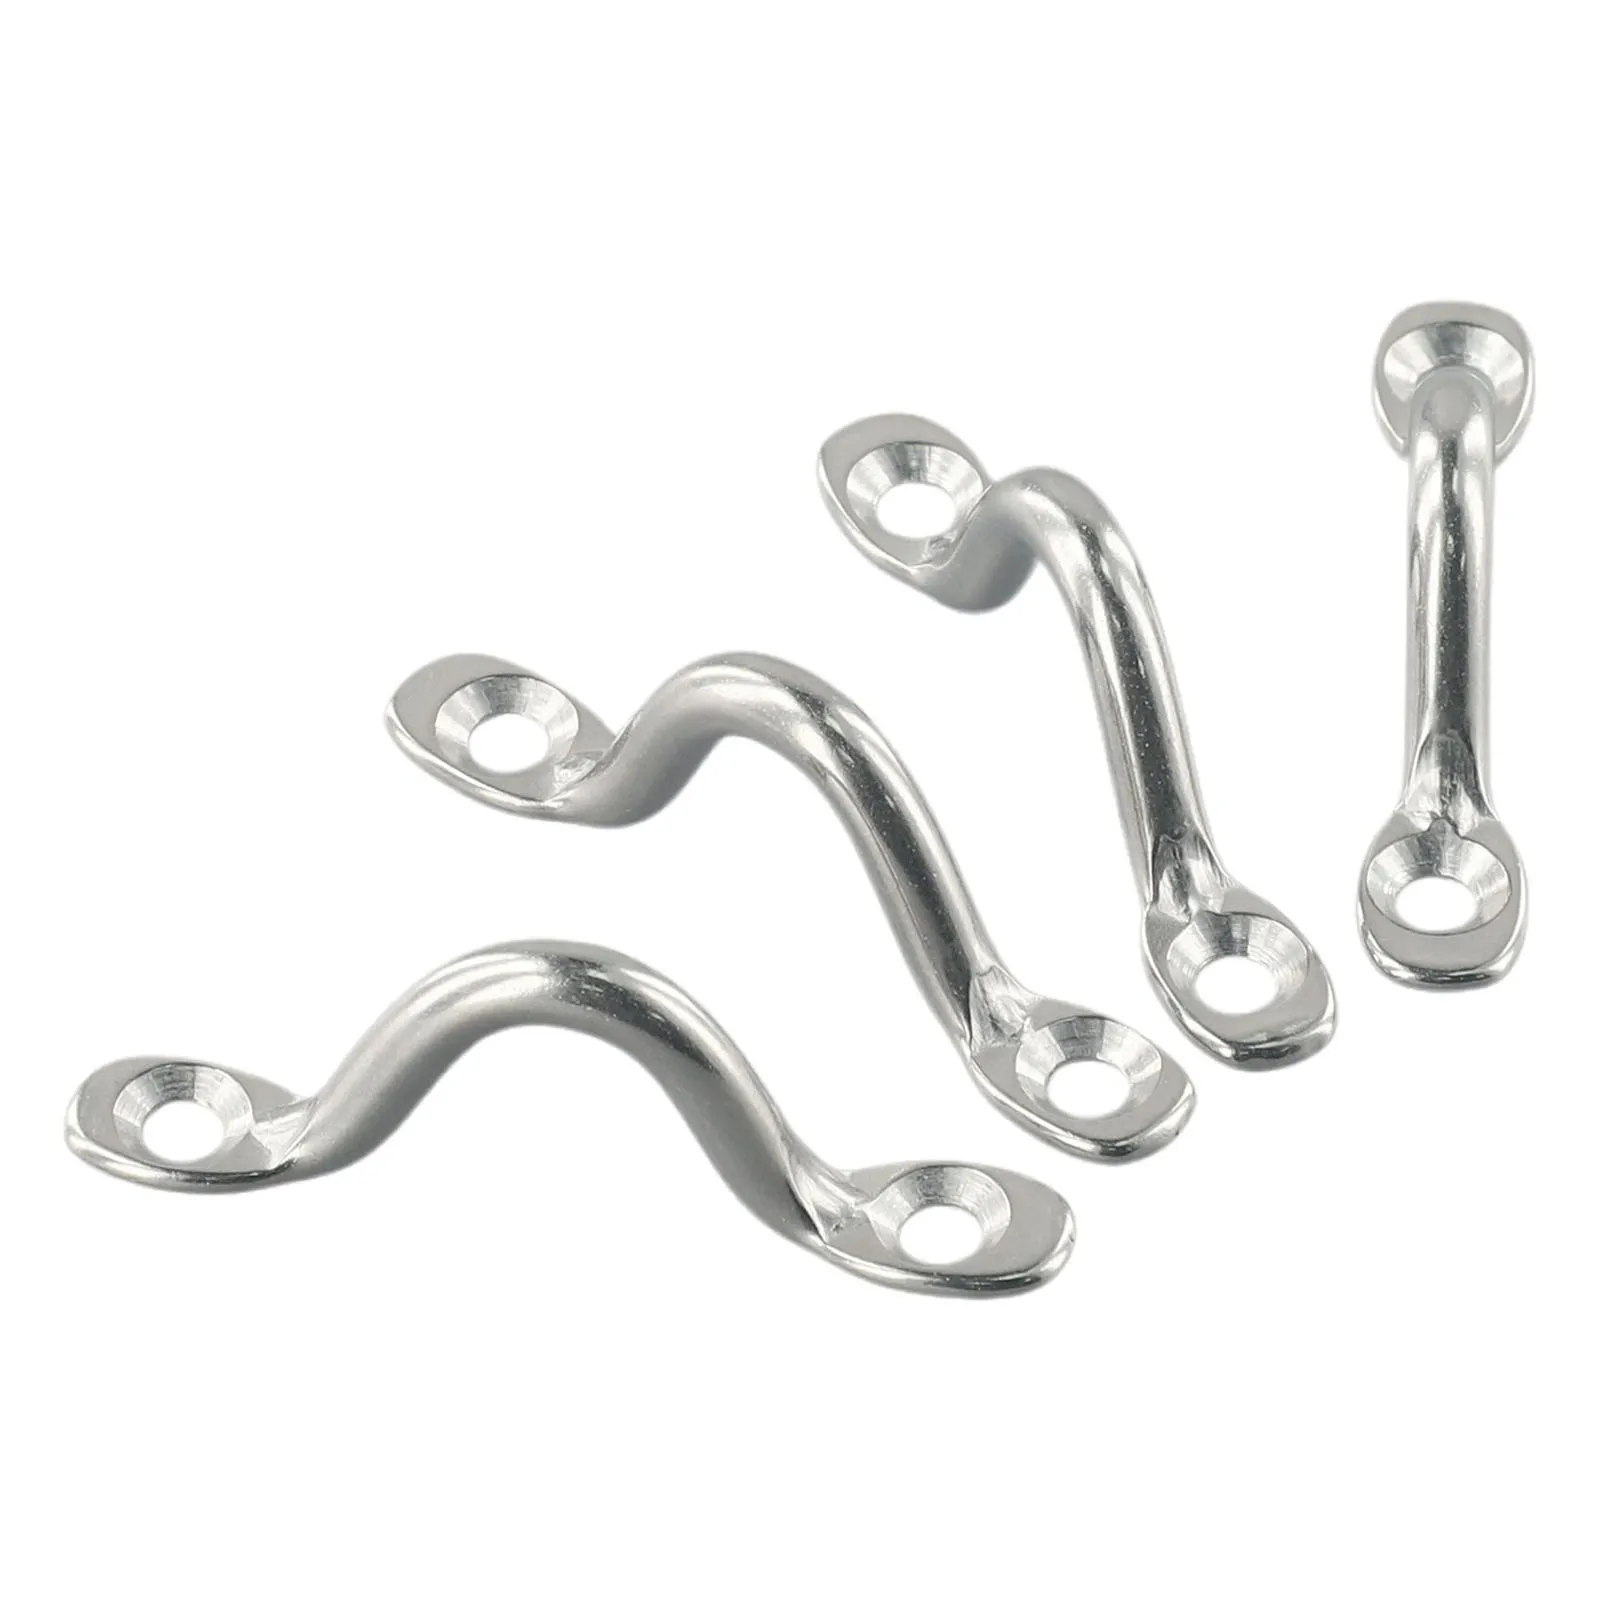 

Handles Wire Eye Straps Heavy Duty Parts Accessories Canopy Fender Hook Pull Saddle Silver Stainless Steel Quality